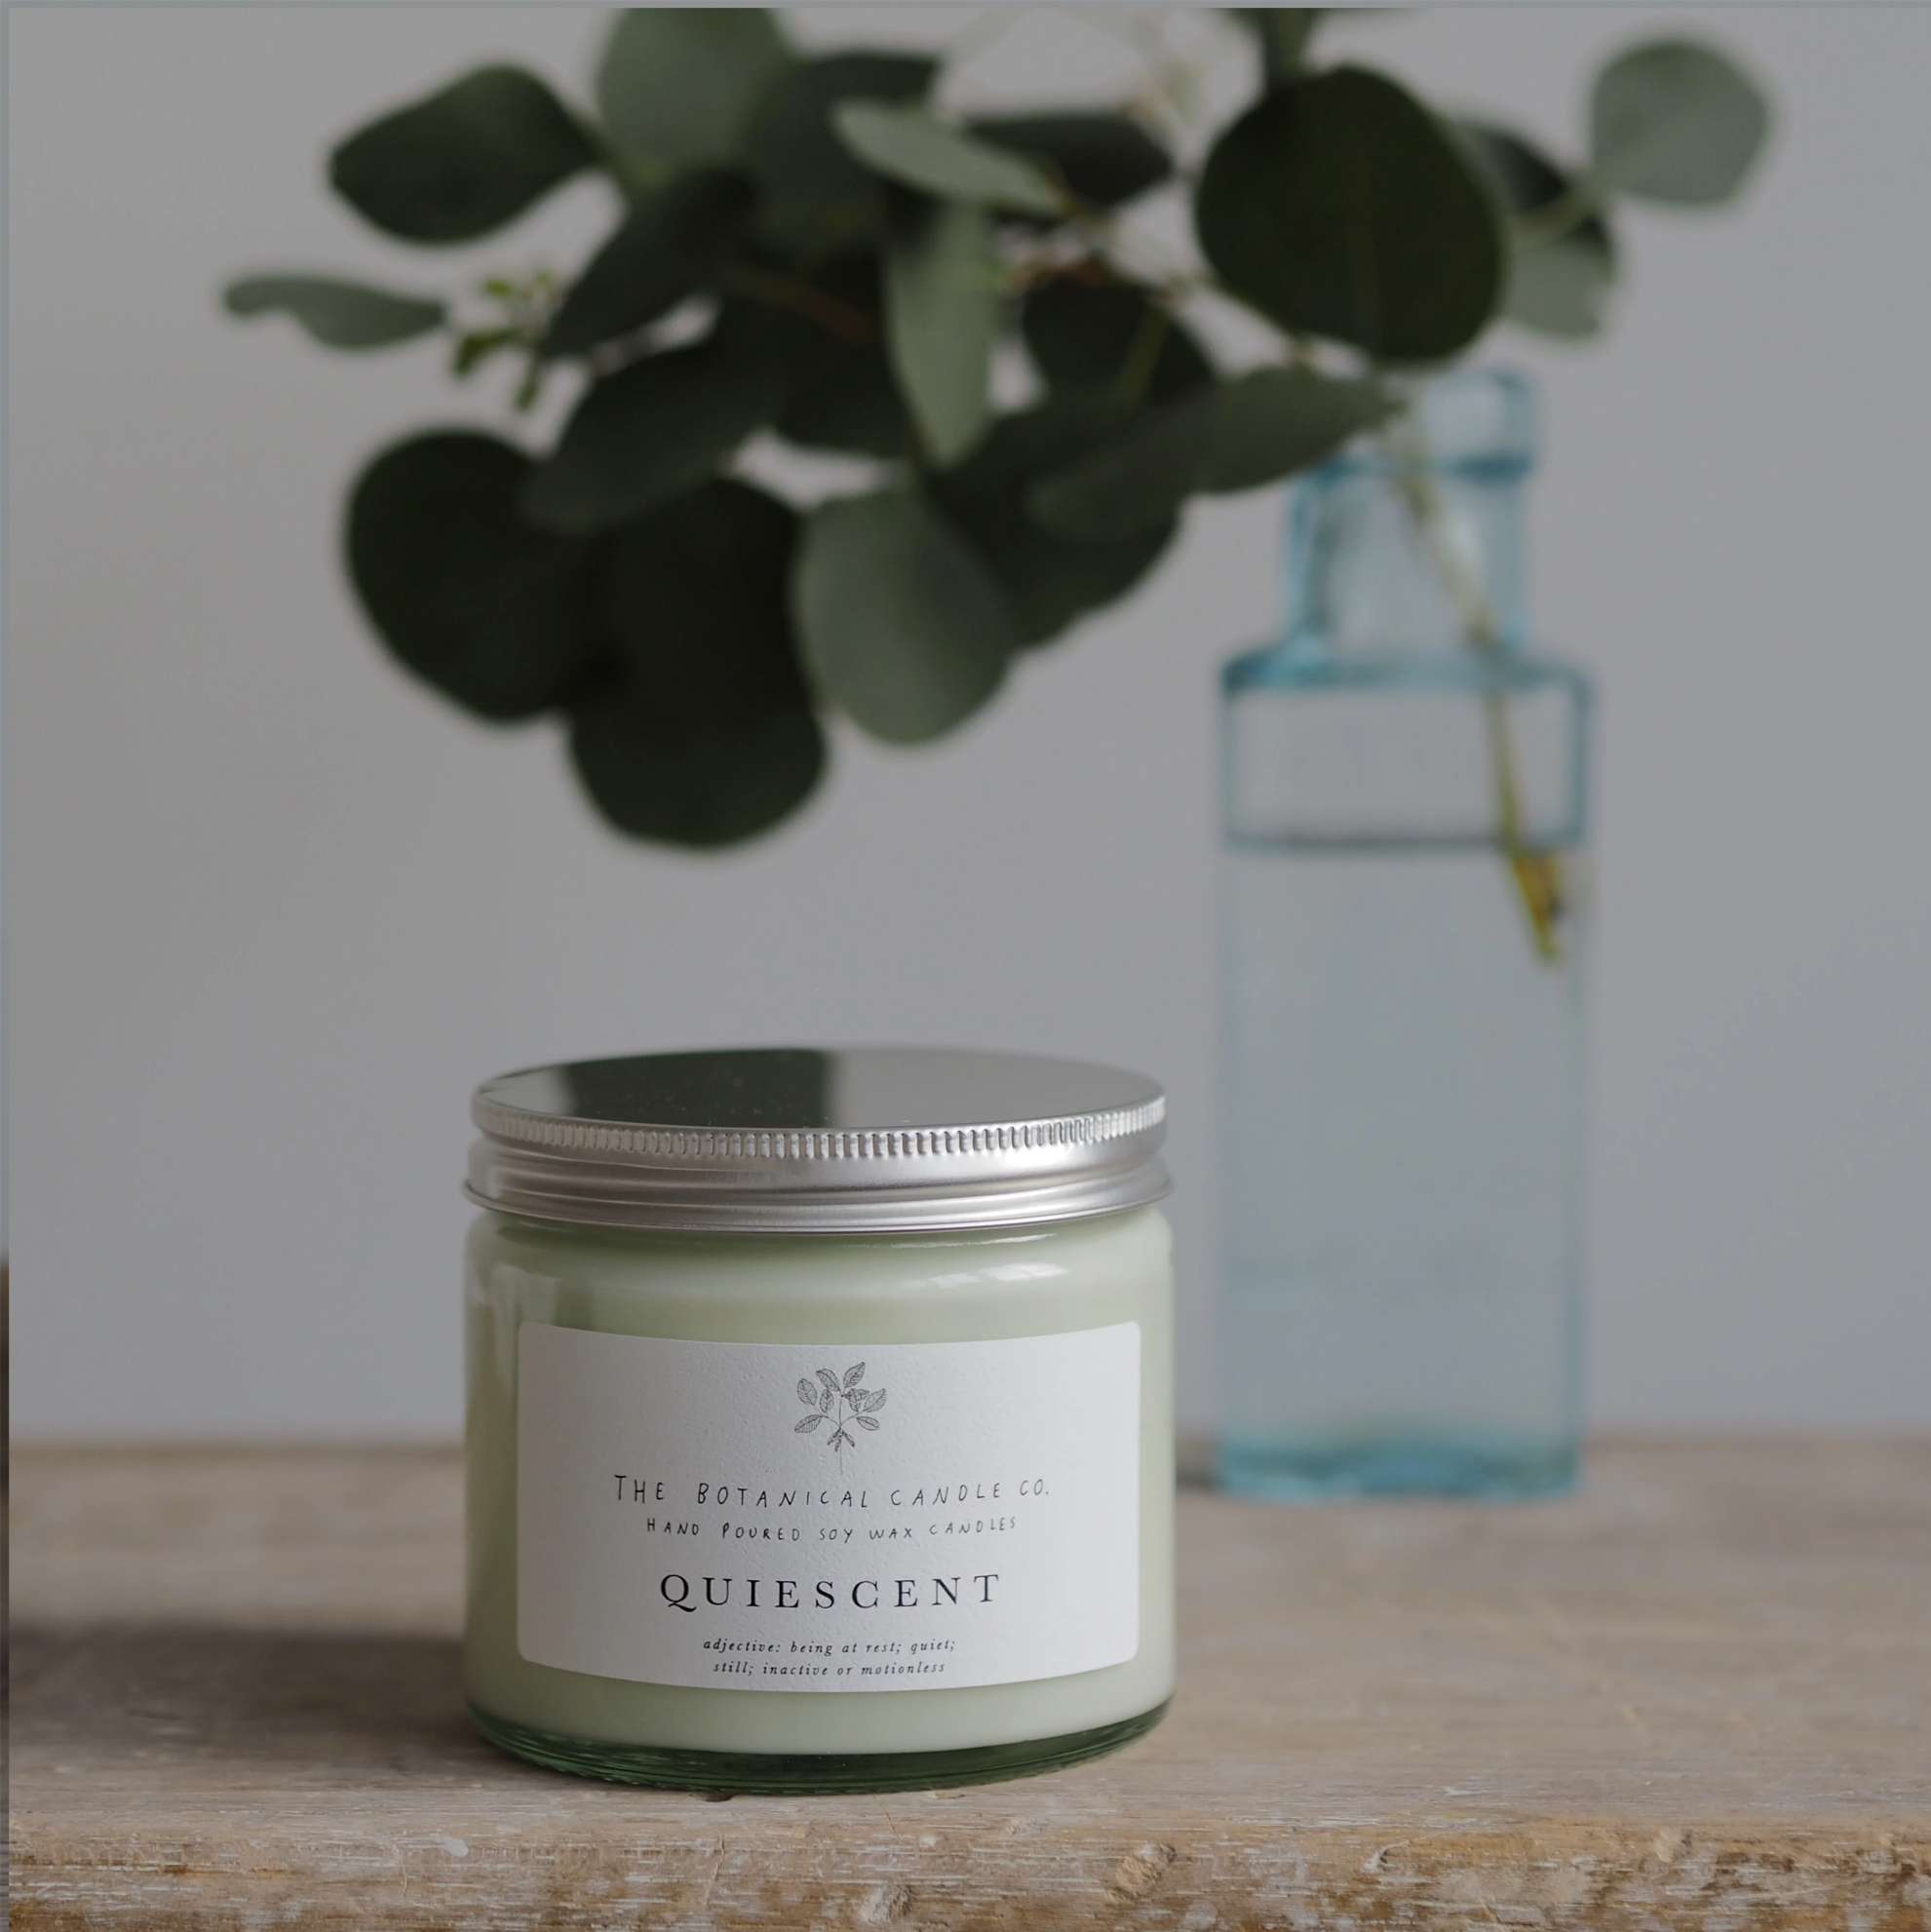 The Botanical Candle Co. Quiescent Candle - Assorted